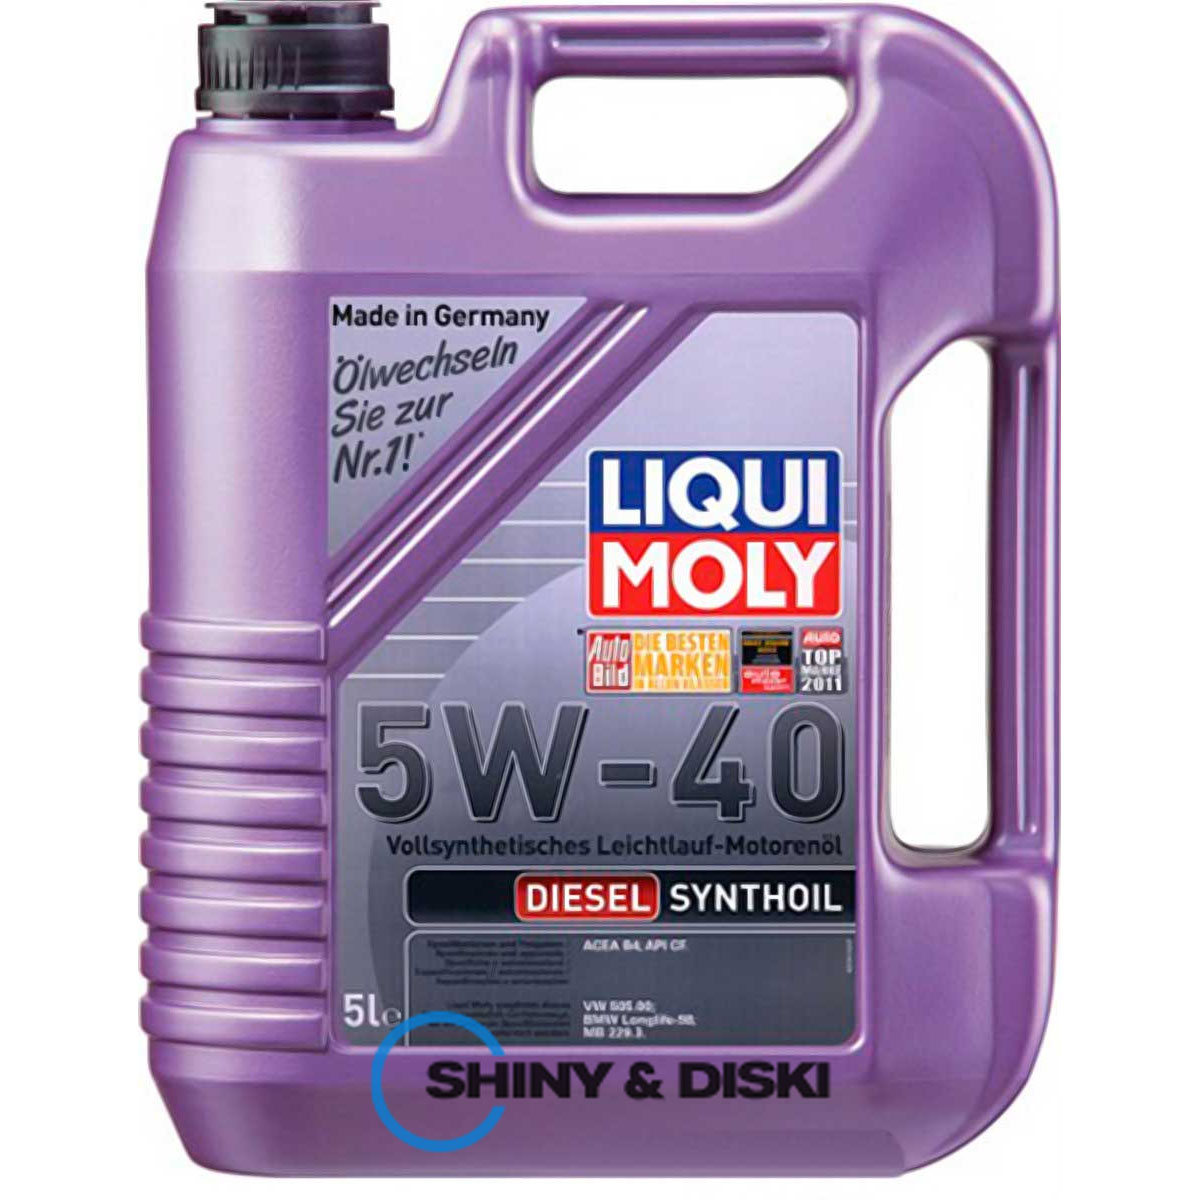 liqui moly diesel synthoil